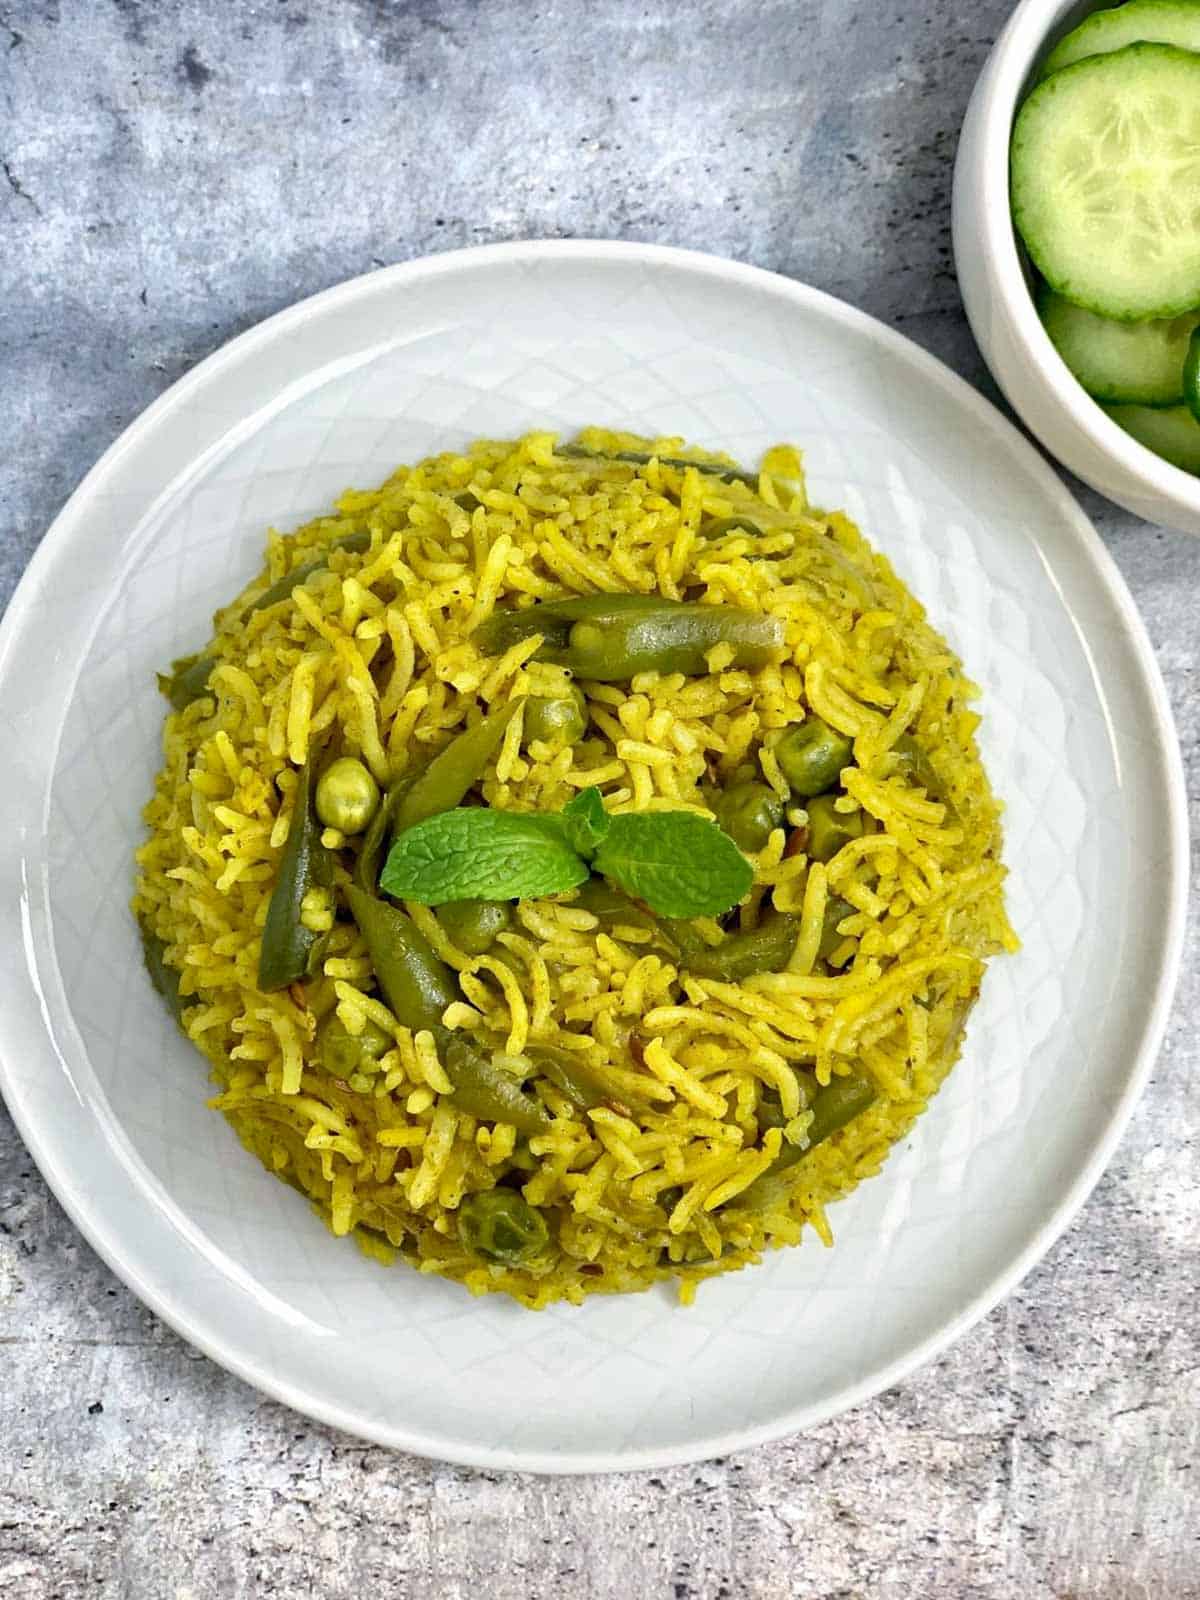 pudina rice served on a plate garnished with mint leaves with side of cucumbers